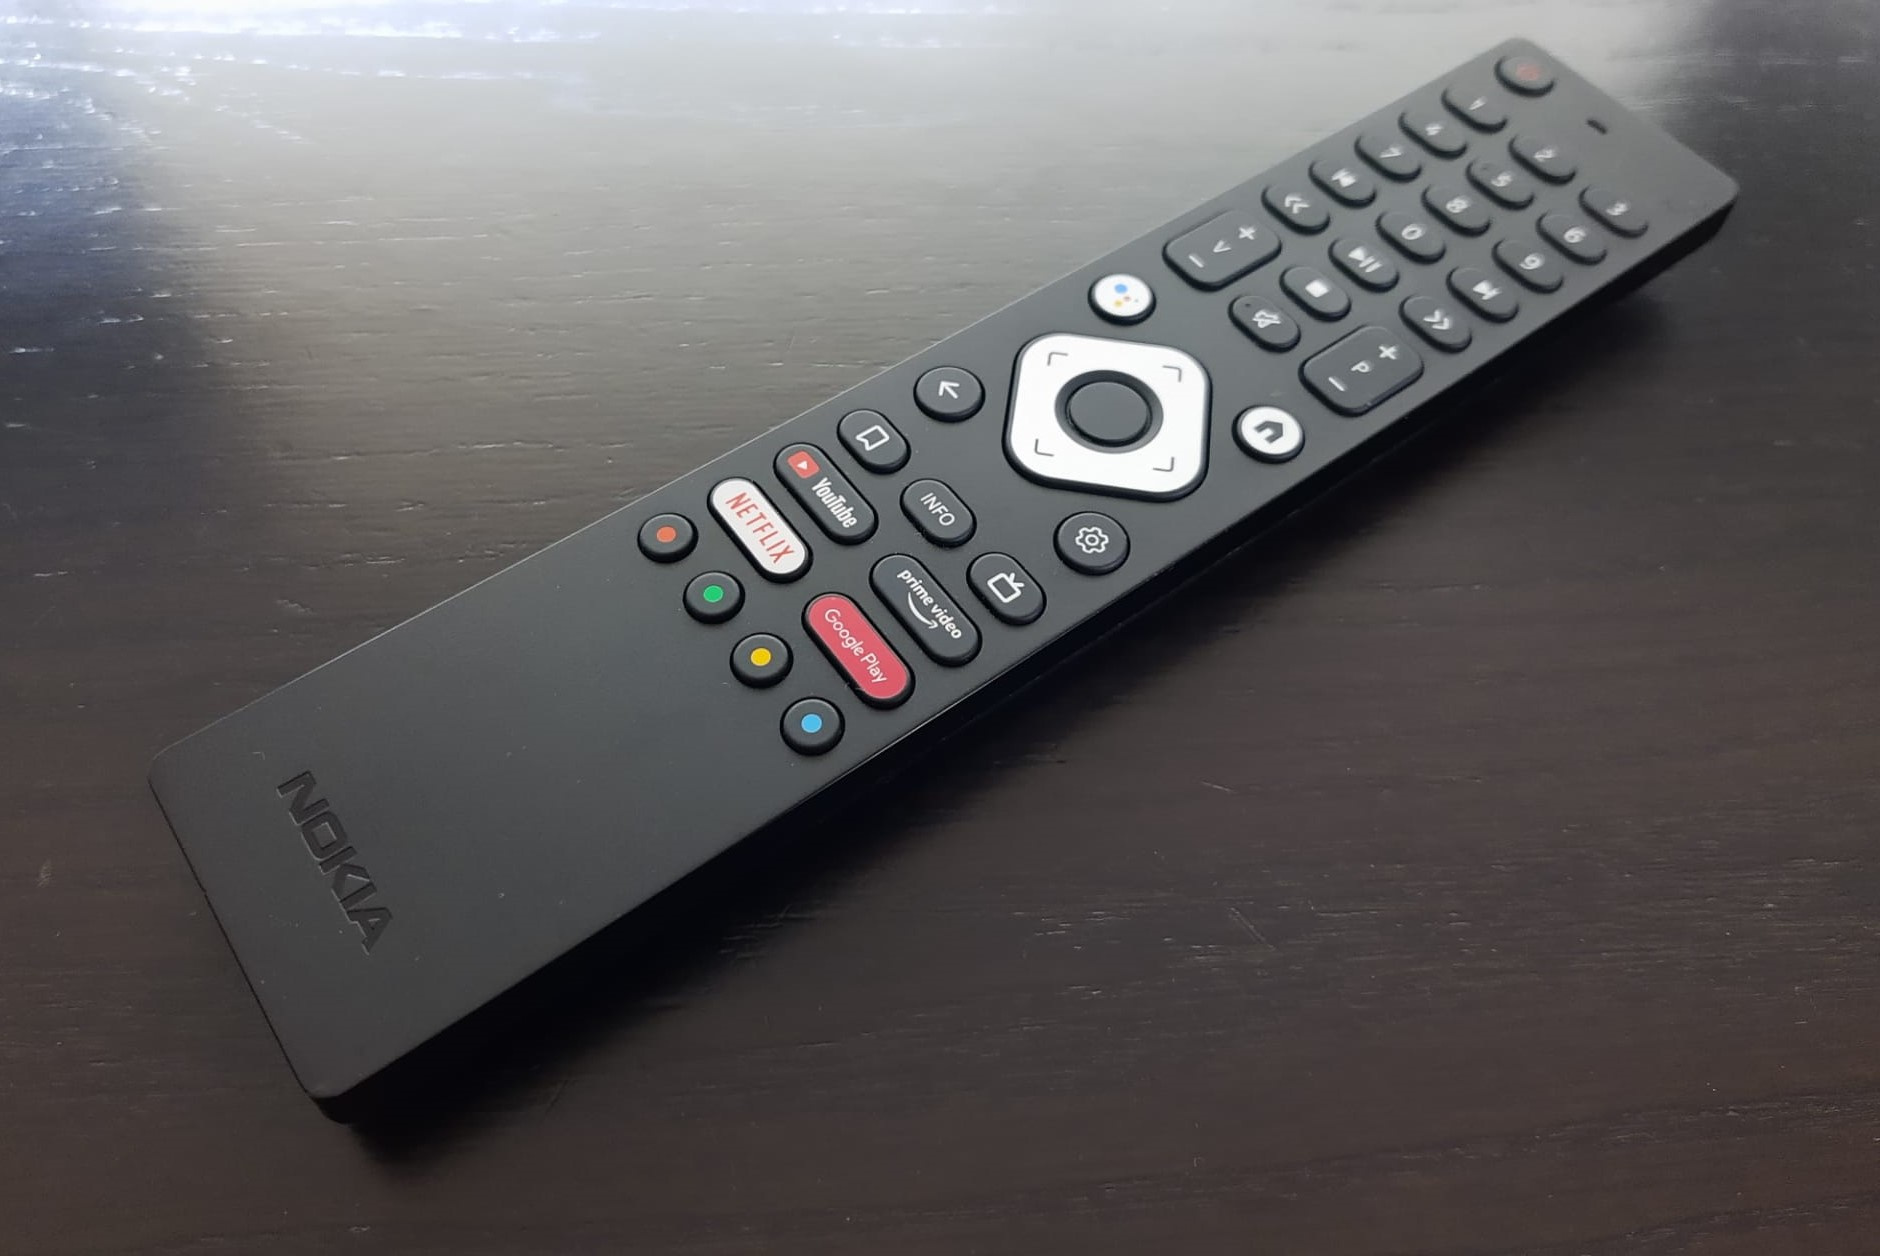 The remote has buttons to direct you to major streaming services and a microphone for voice control., PVL